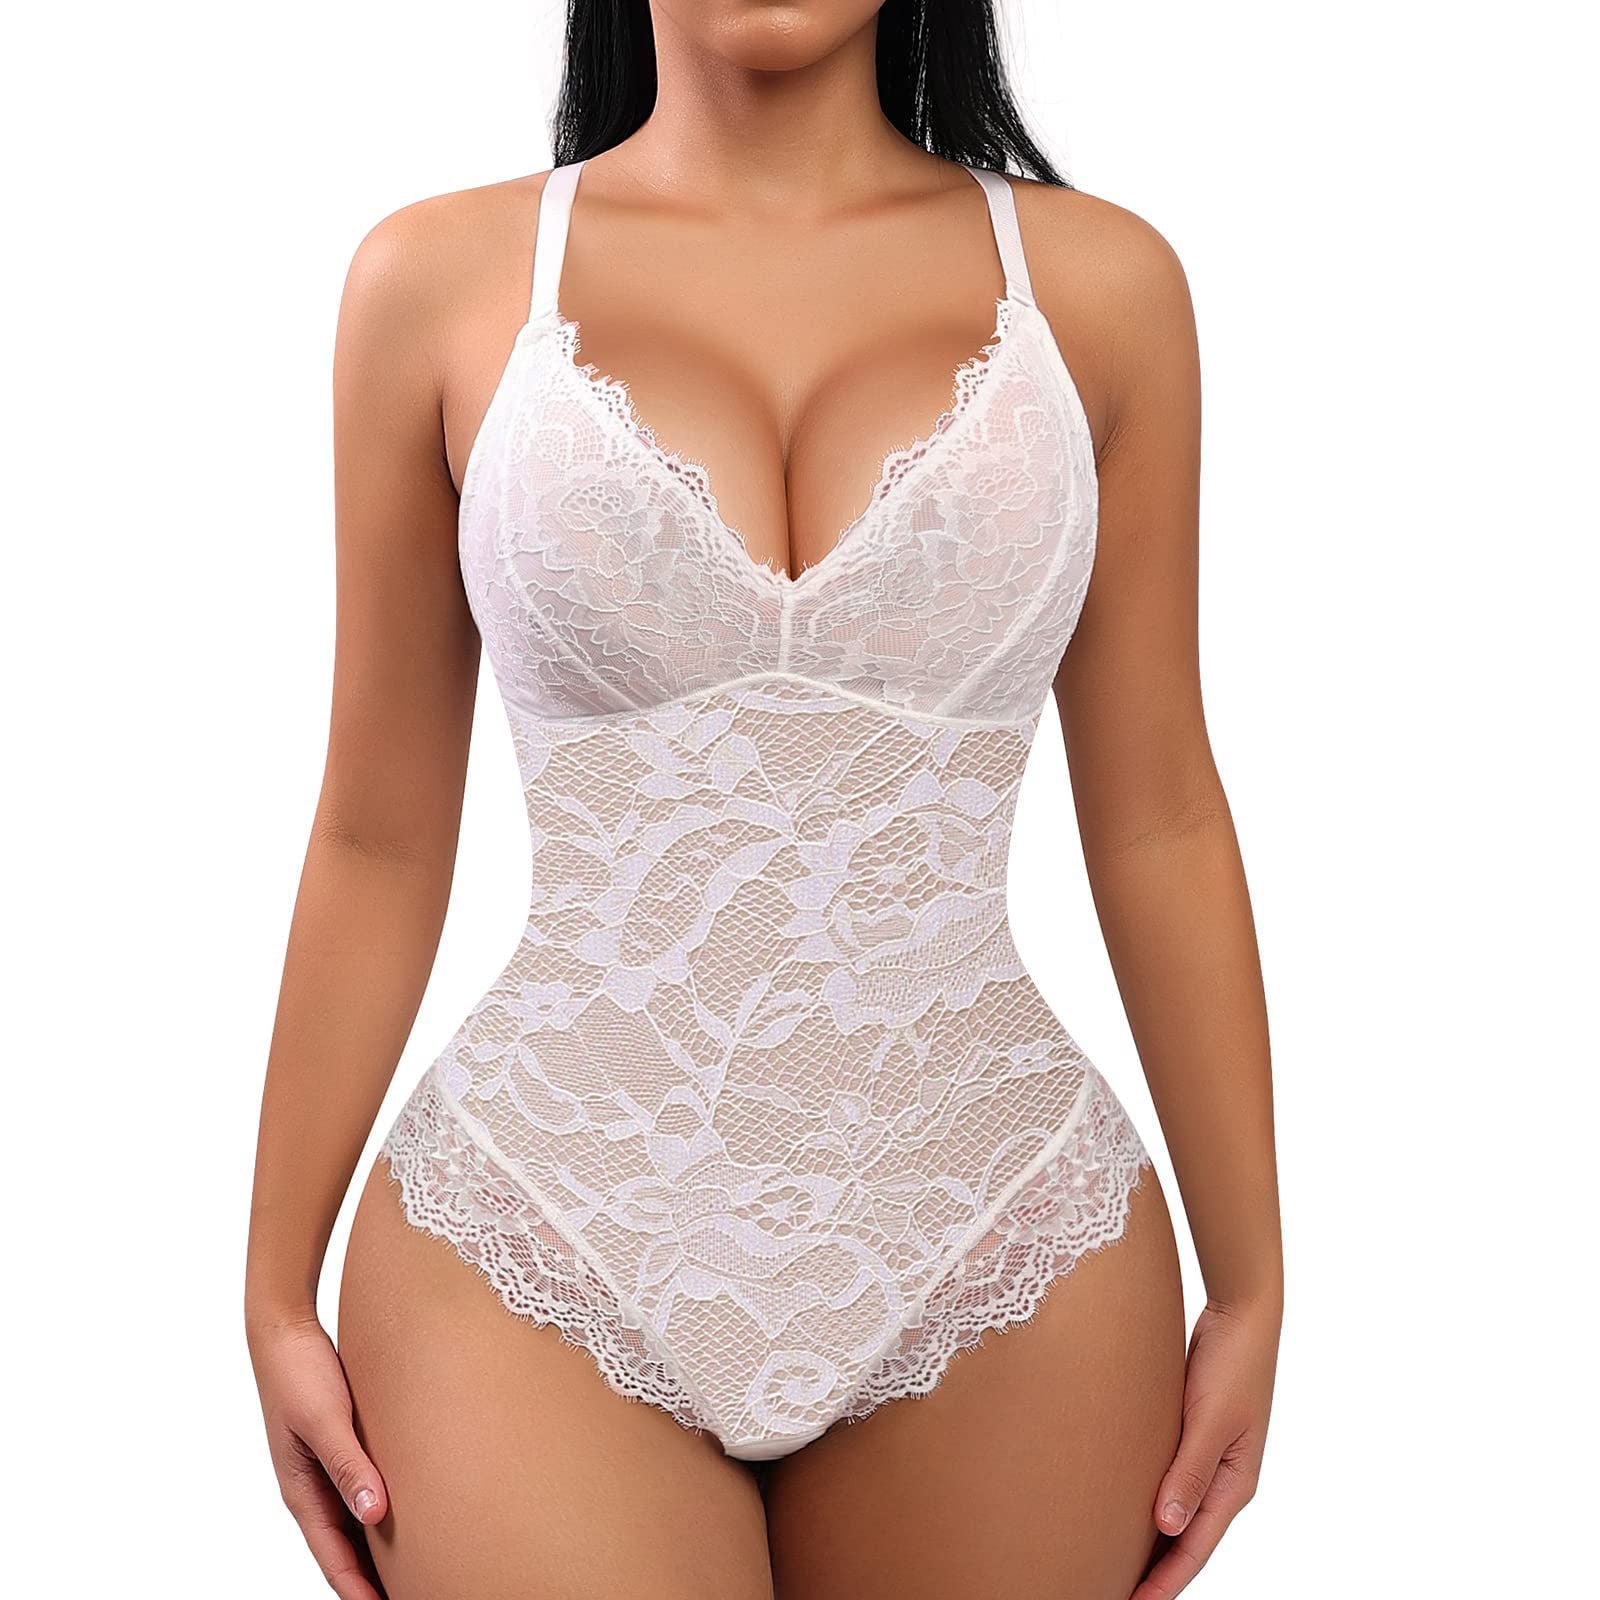 Full Lace Slimming Bodysuit One Piece Shaper